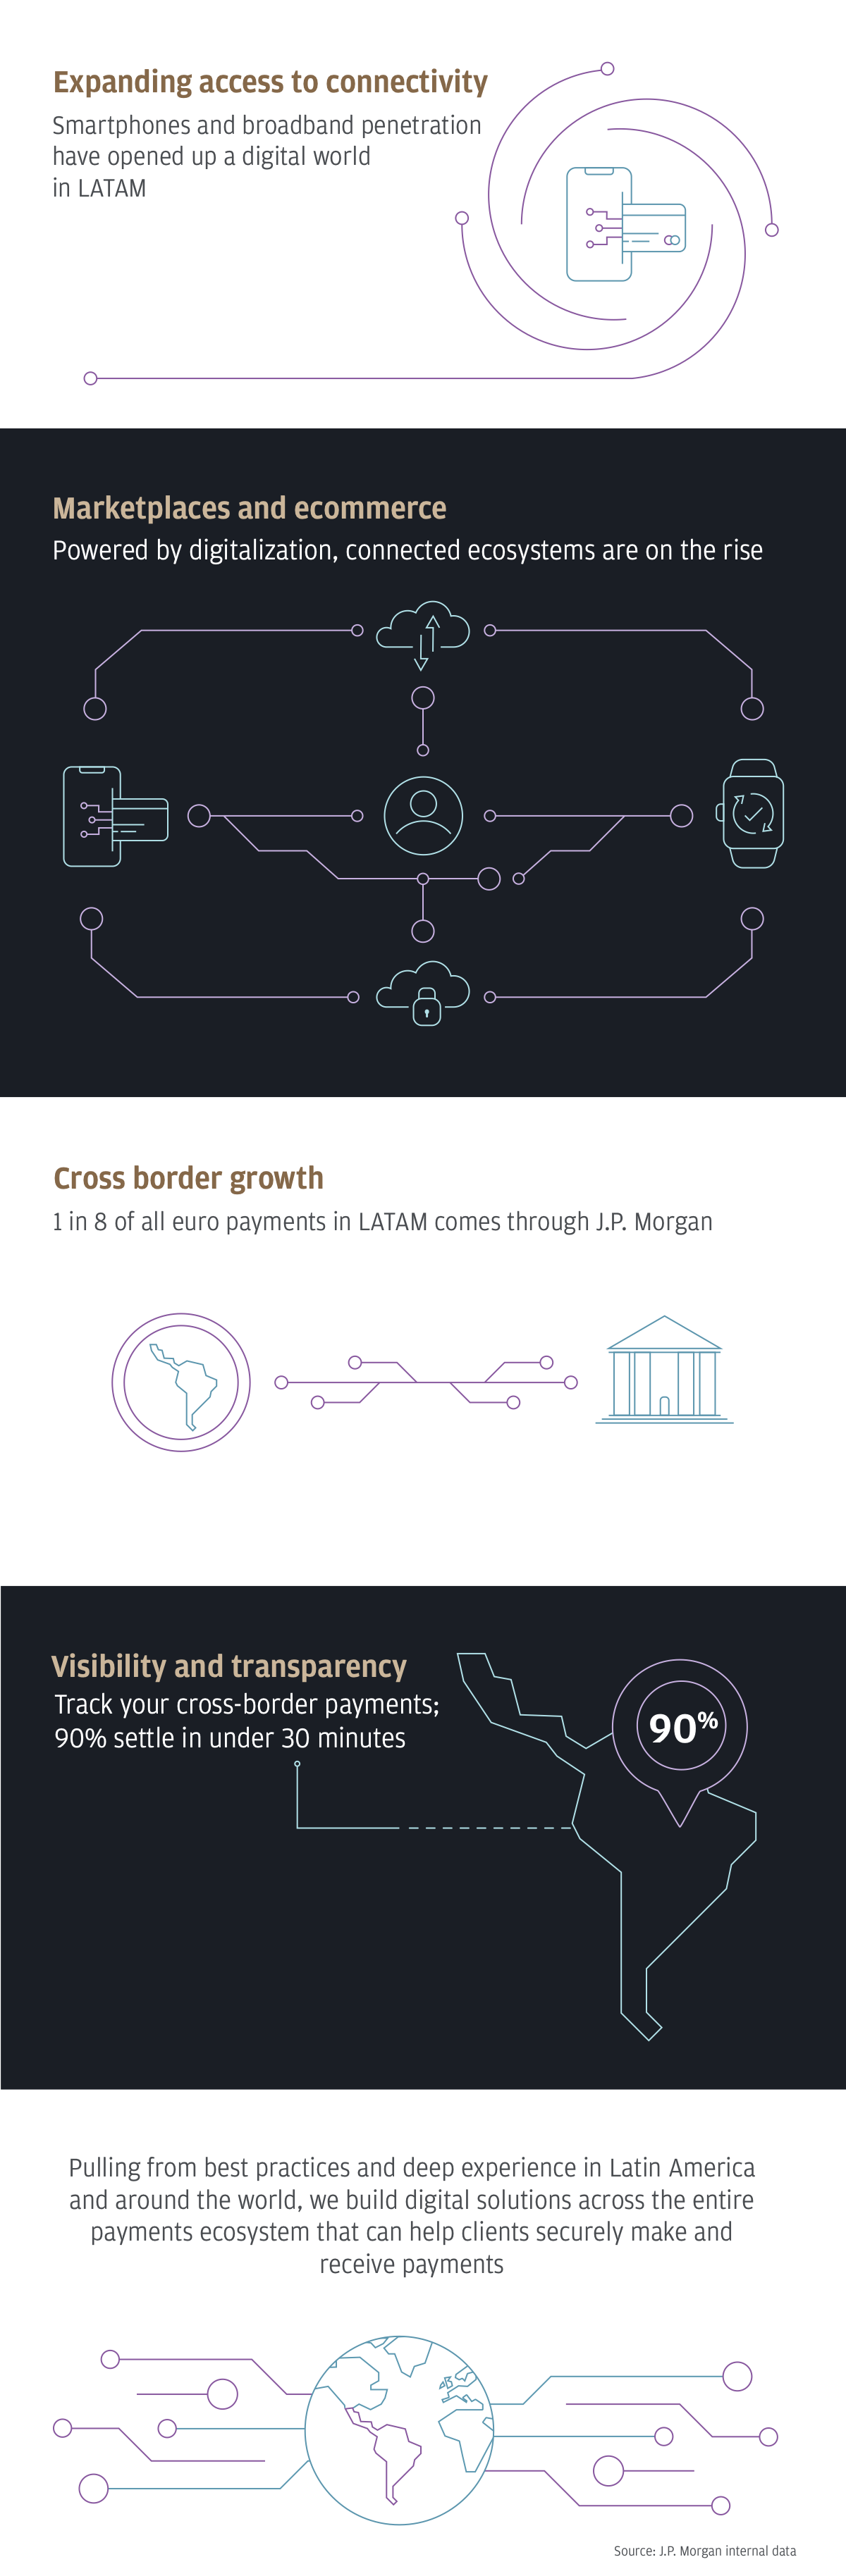 Infographic describes Expanding access to connectivity